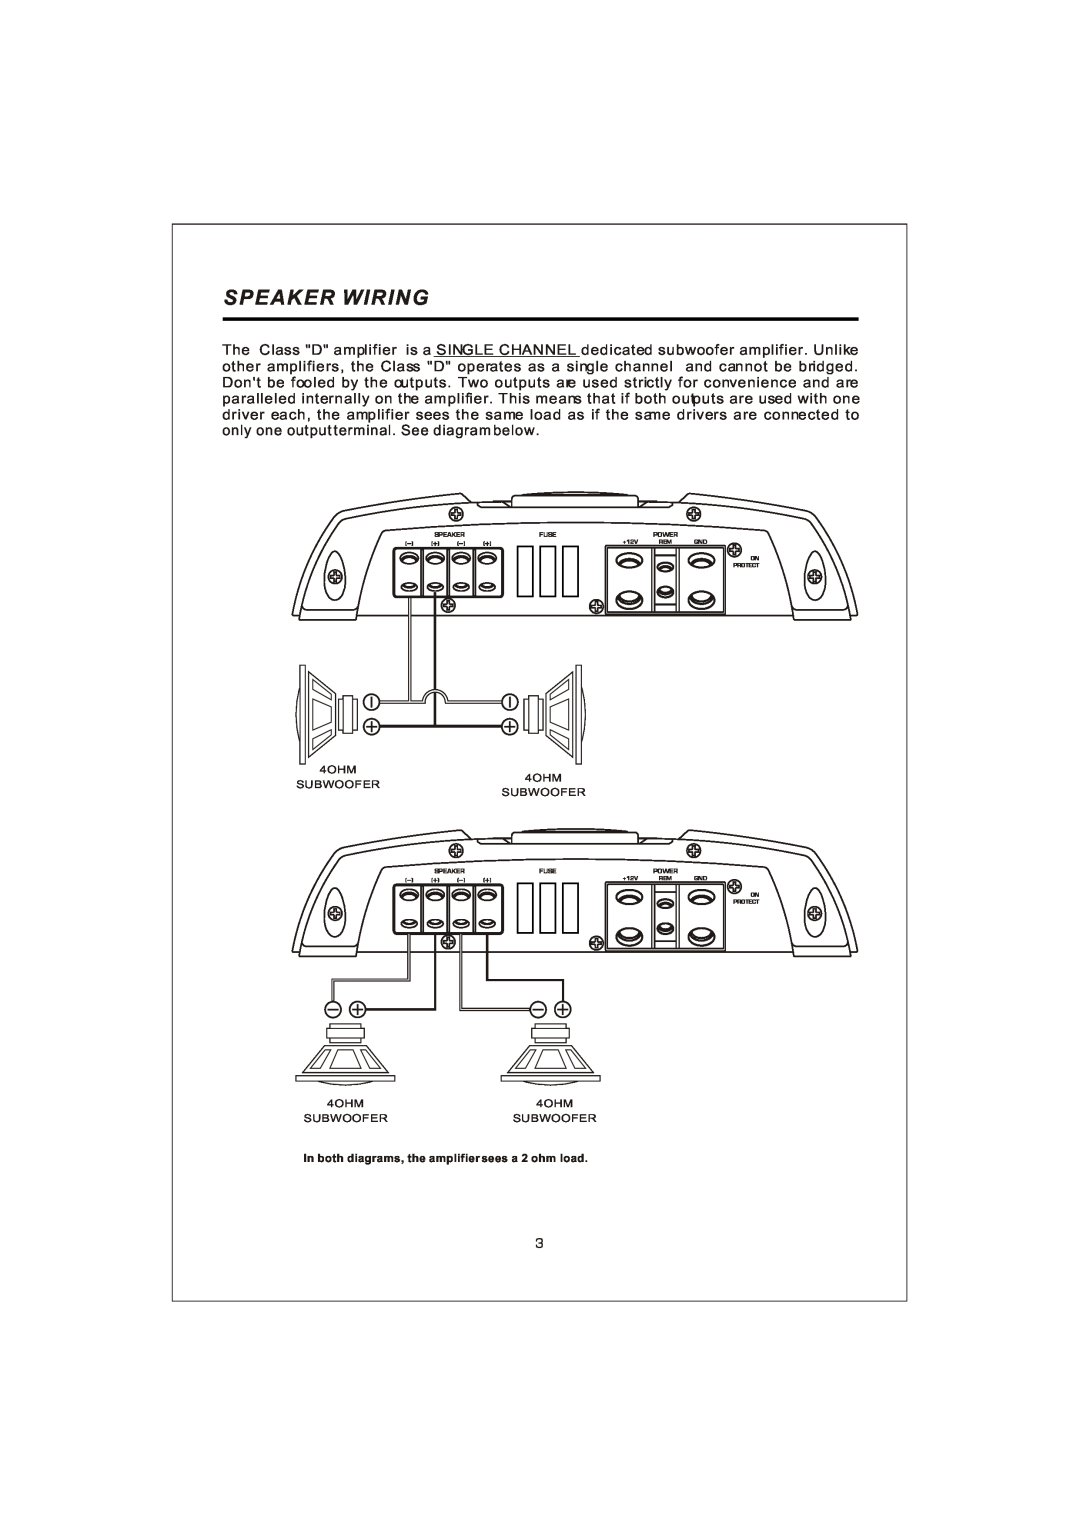 Interfire Audio D1700.1, D3000.1, D900.1 instruction manual Speaker Wiring, In both diagrams, the amplifier sees a 2 ohm load 